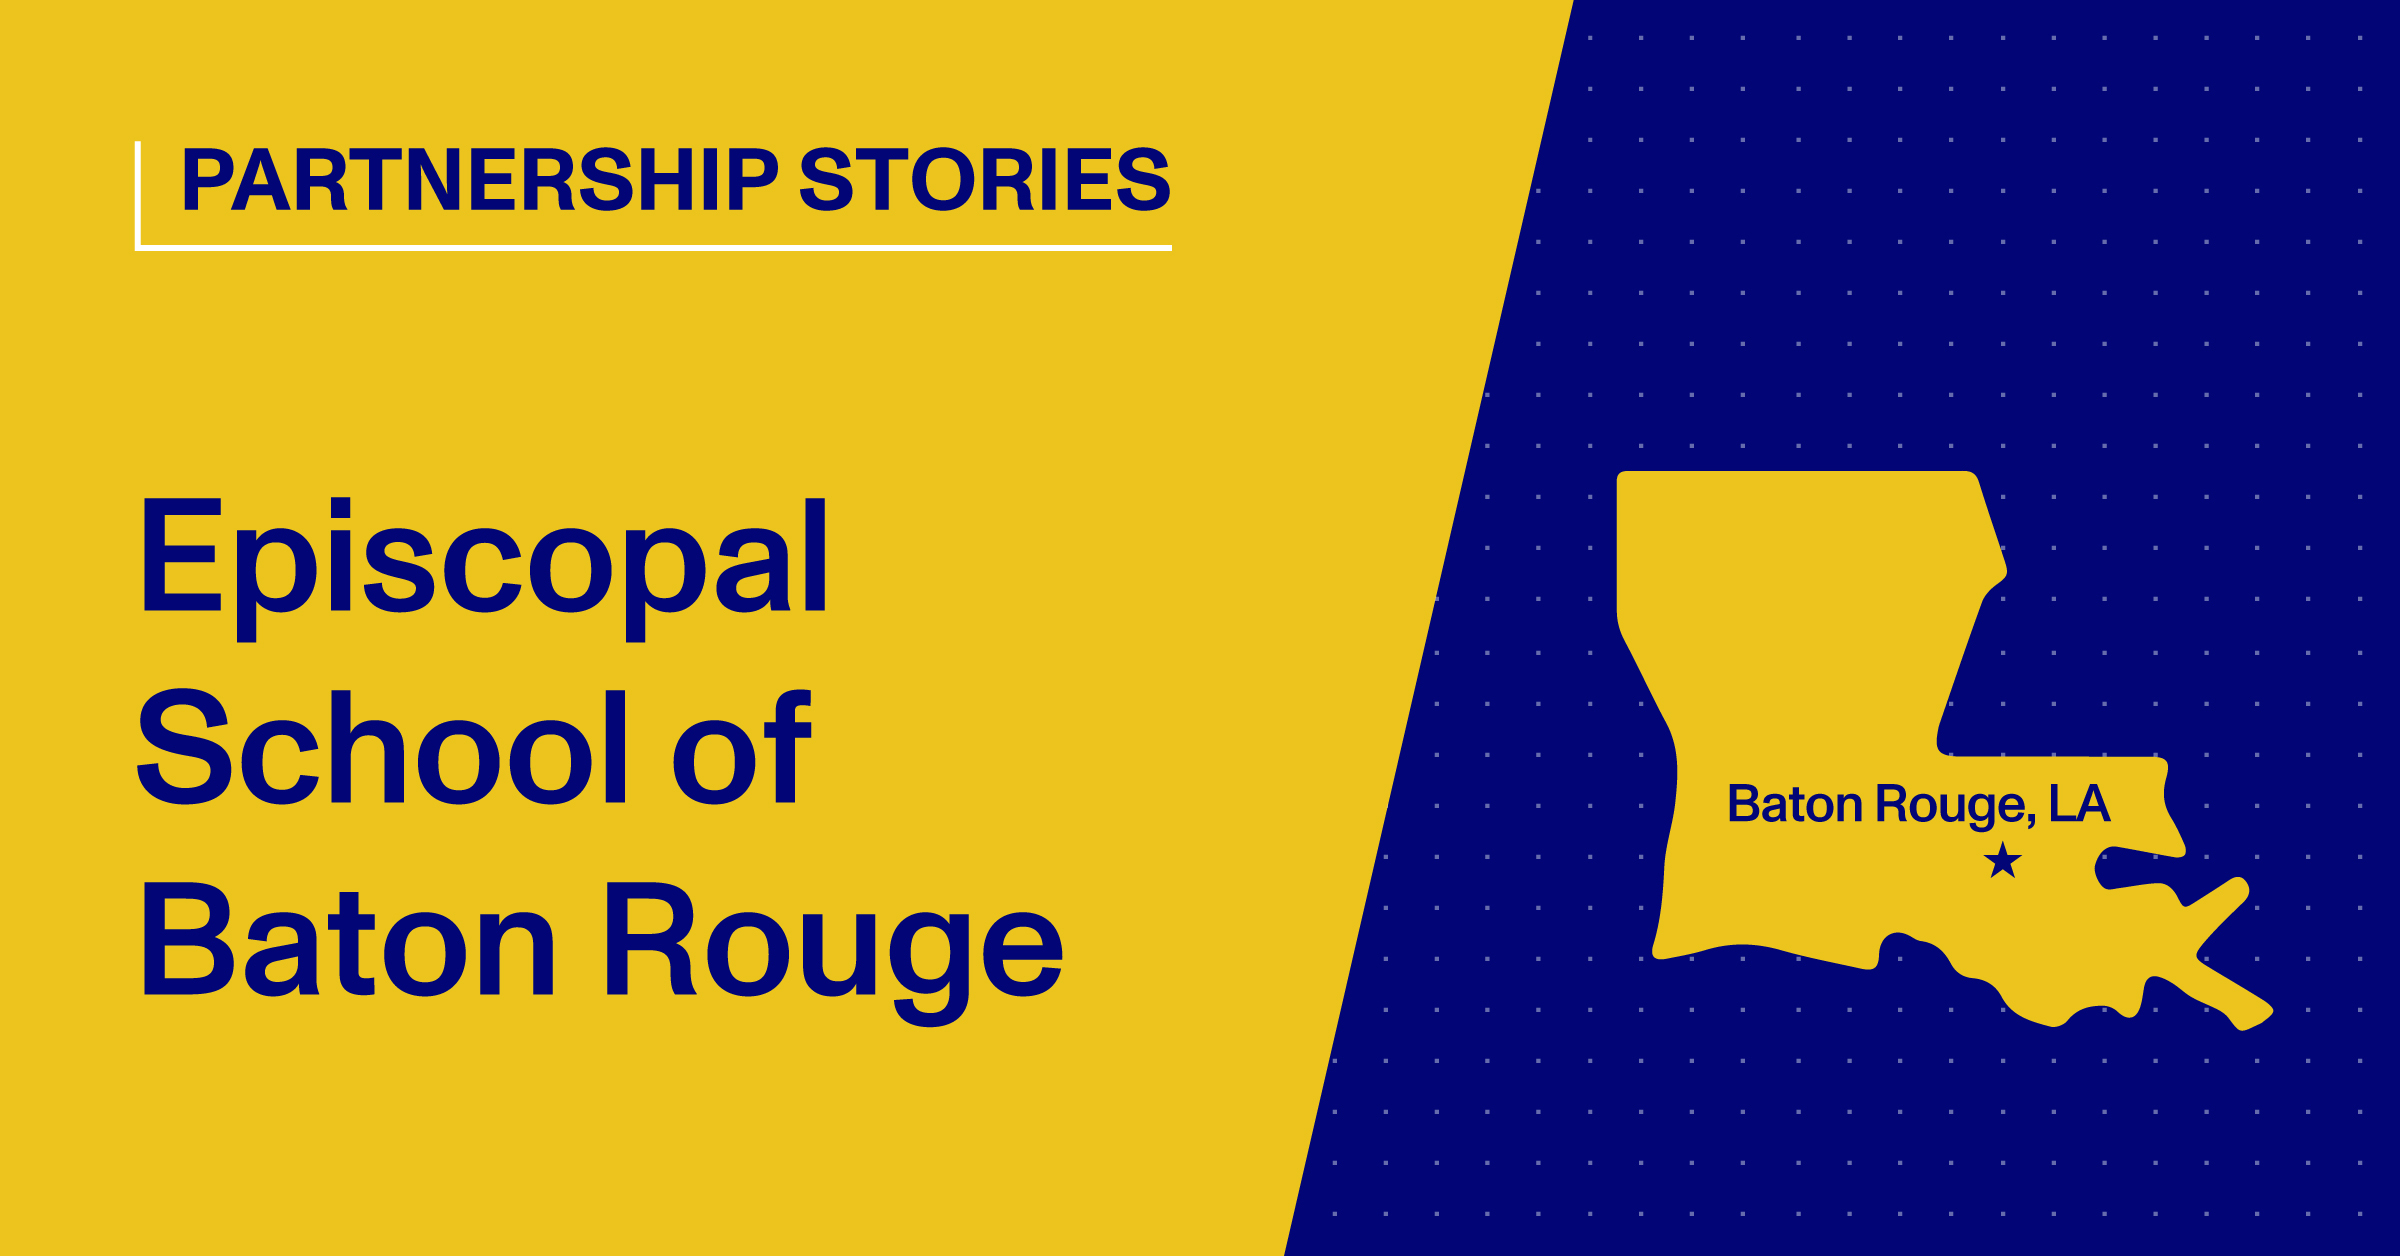 Episcopal School of Baton Rouge Enters TwoYear Partnership With Paper